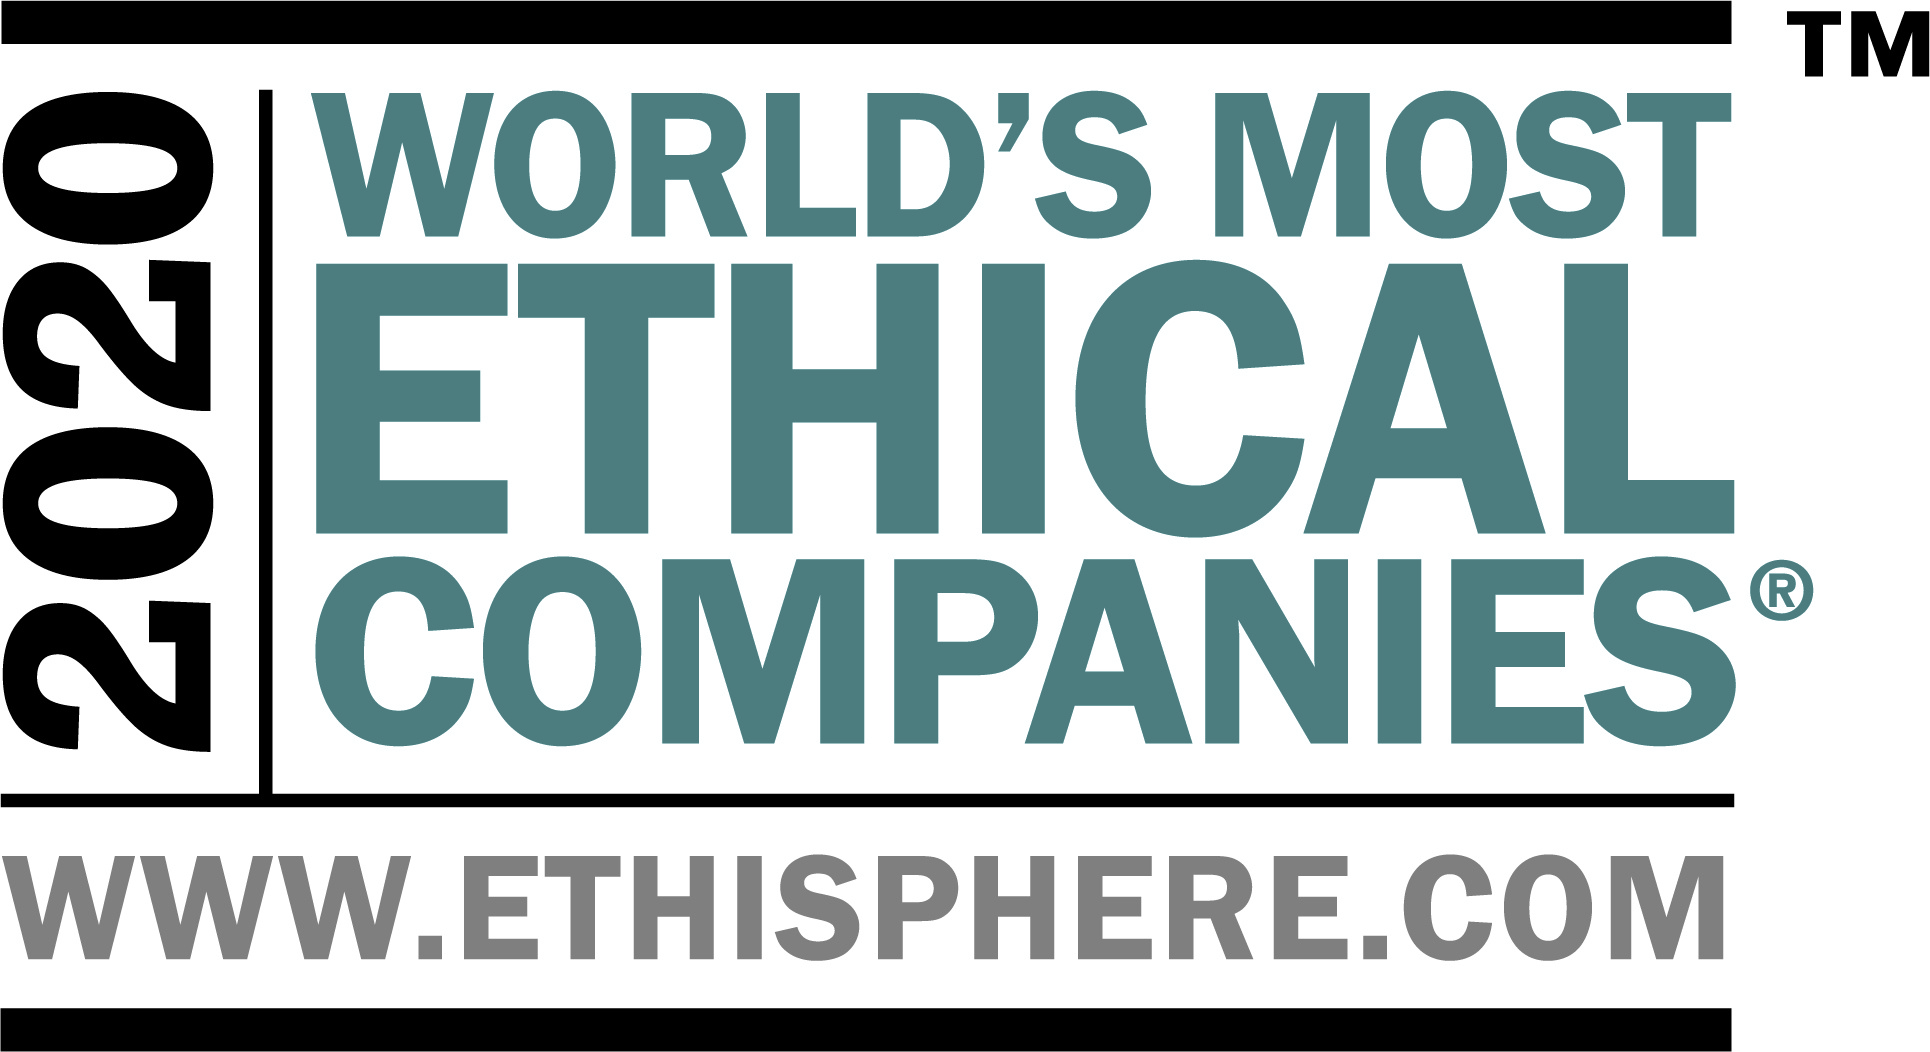 General Motors Recognized as one of the Most Ethical Companies